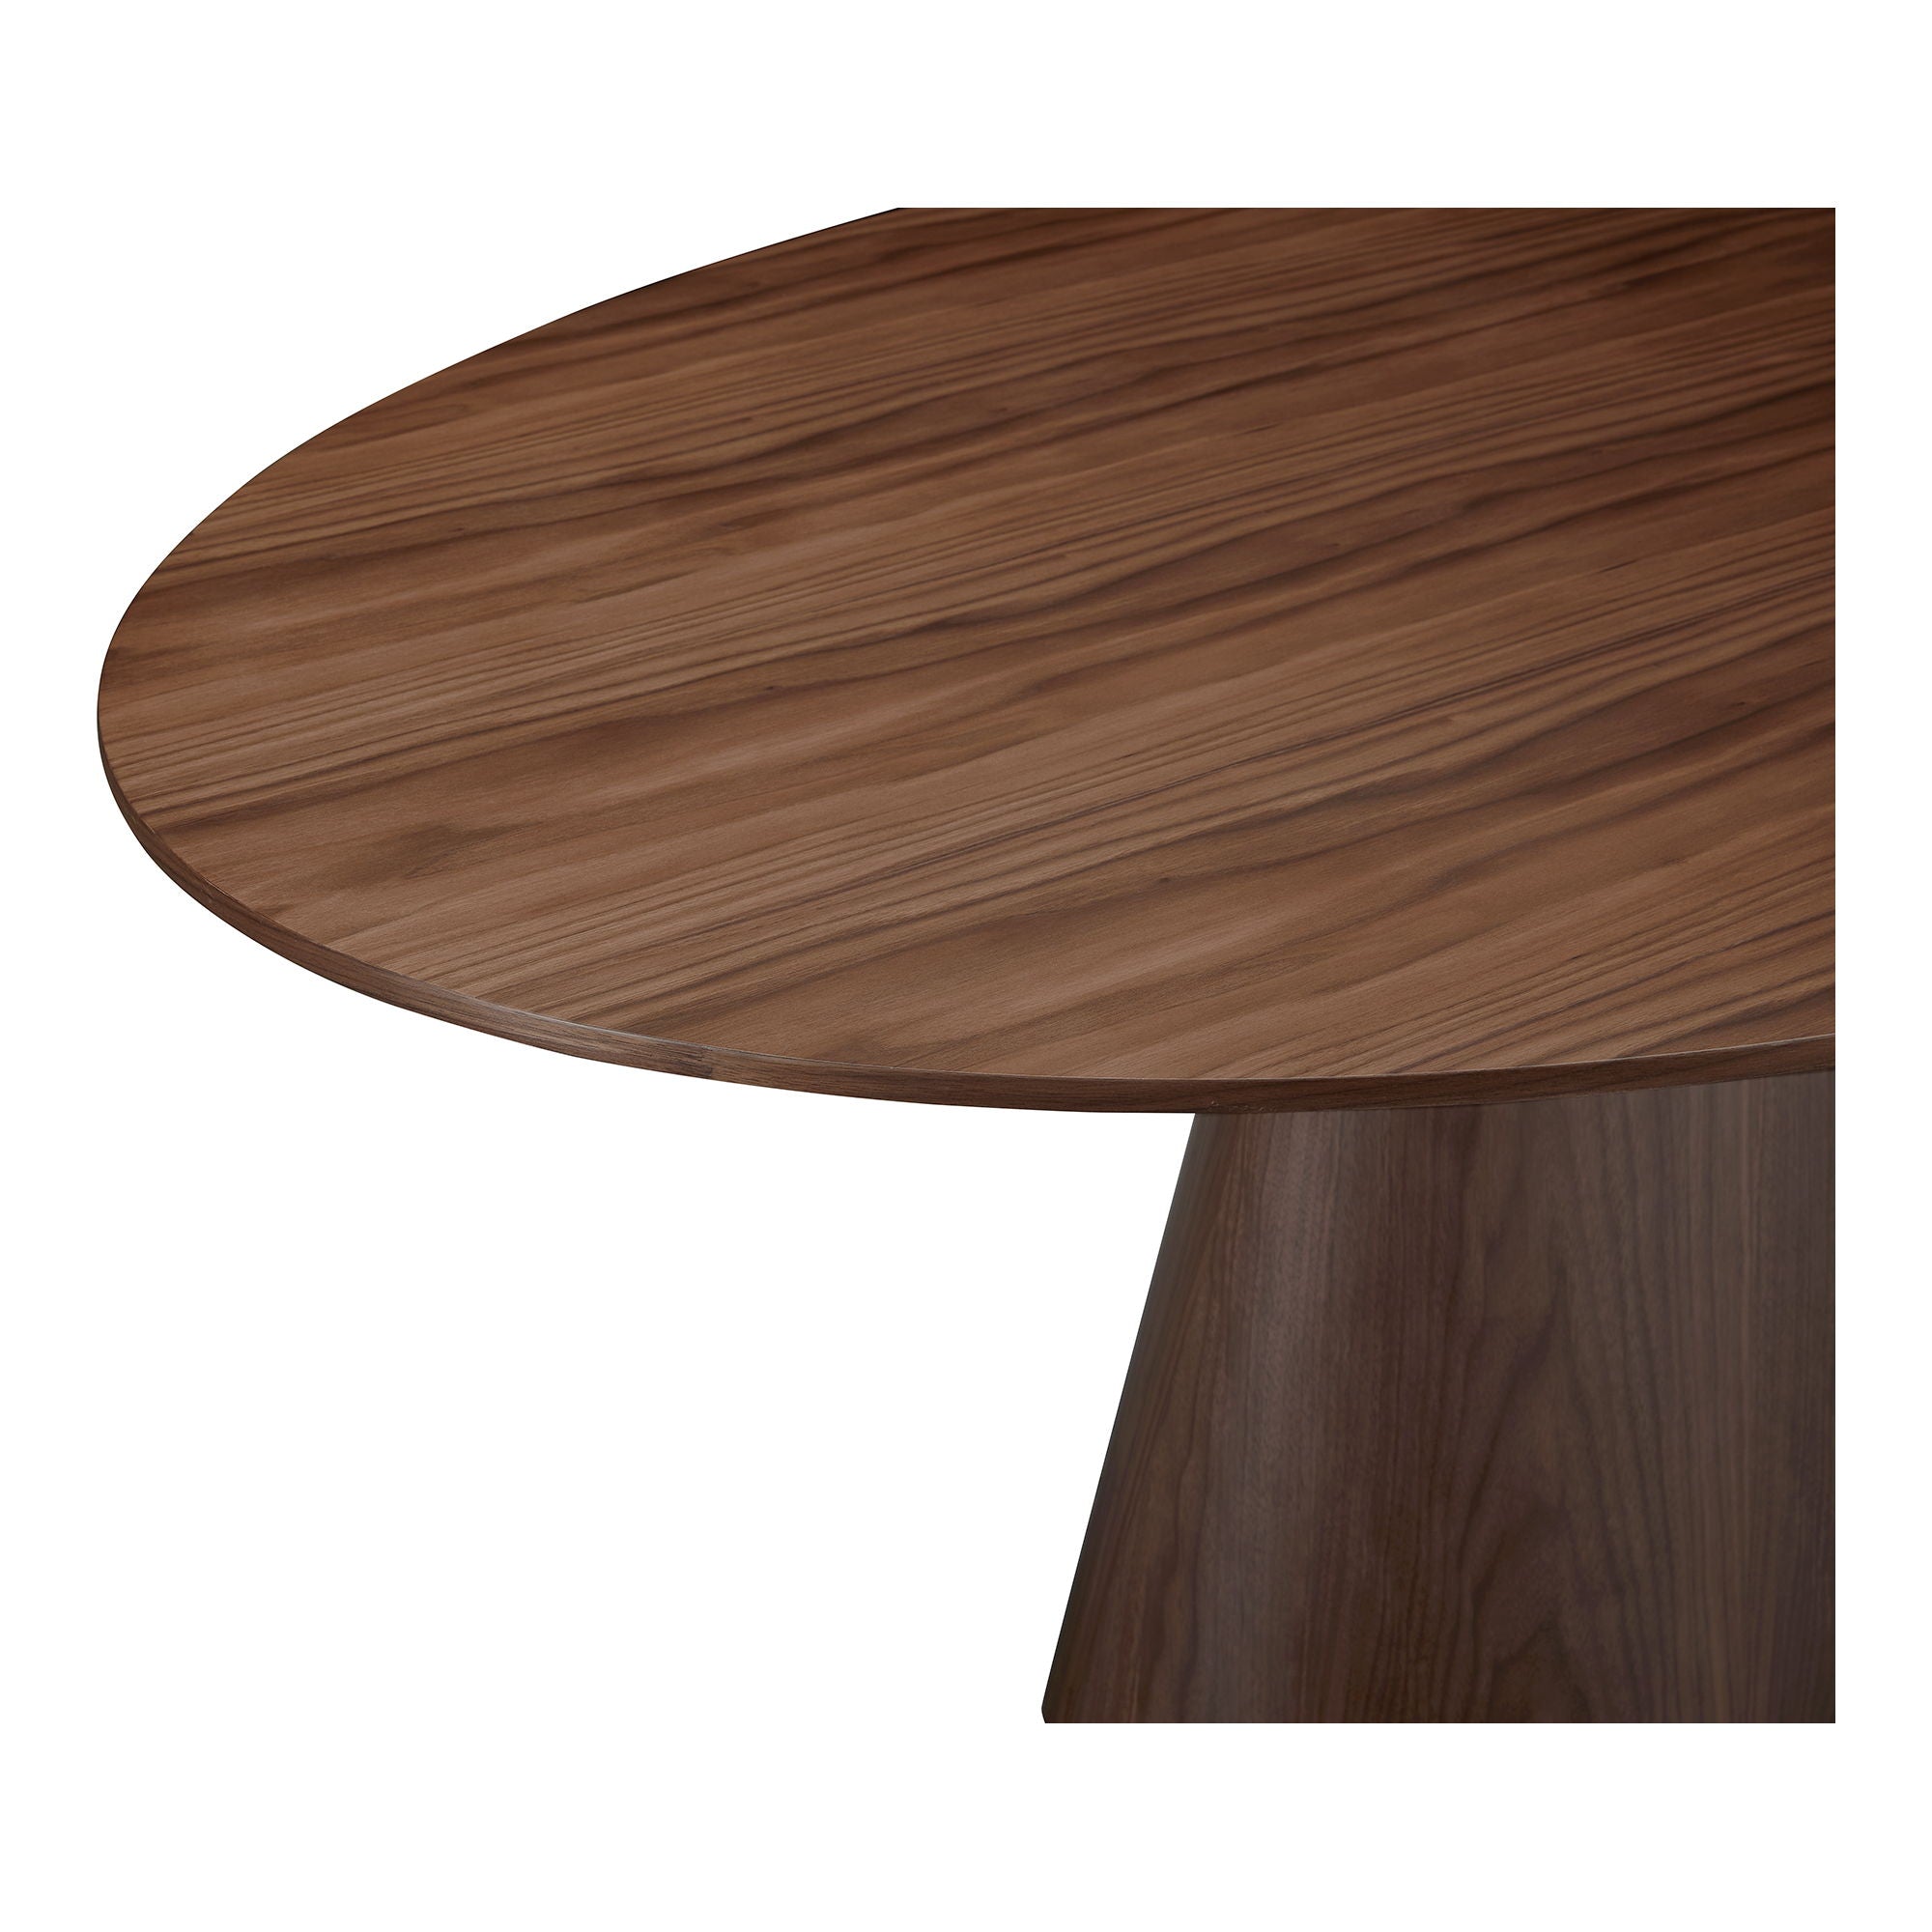 Otago - Oval Dining Table - Natural Walnut